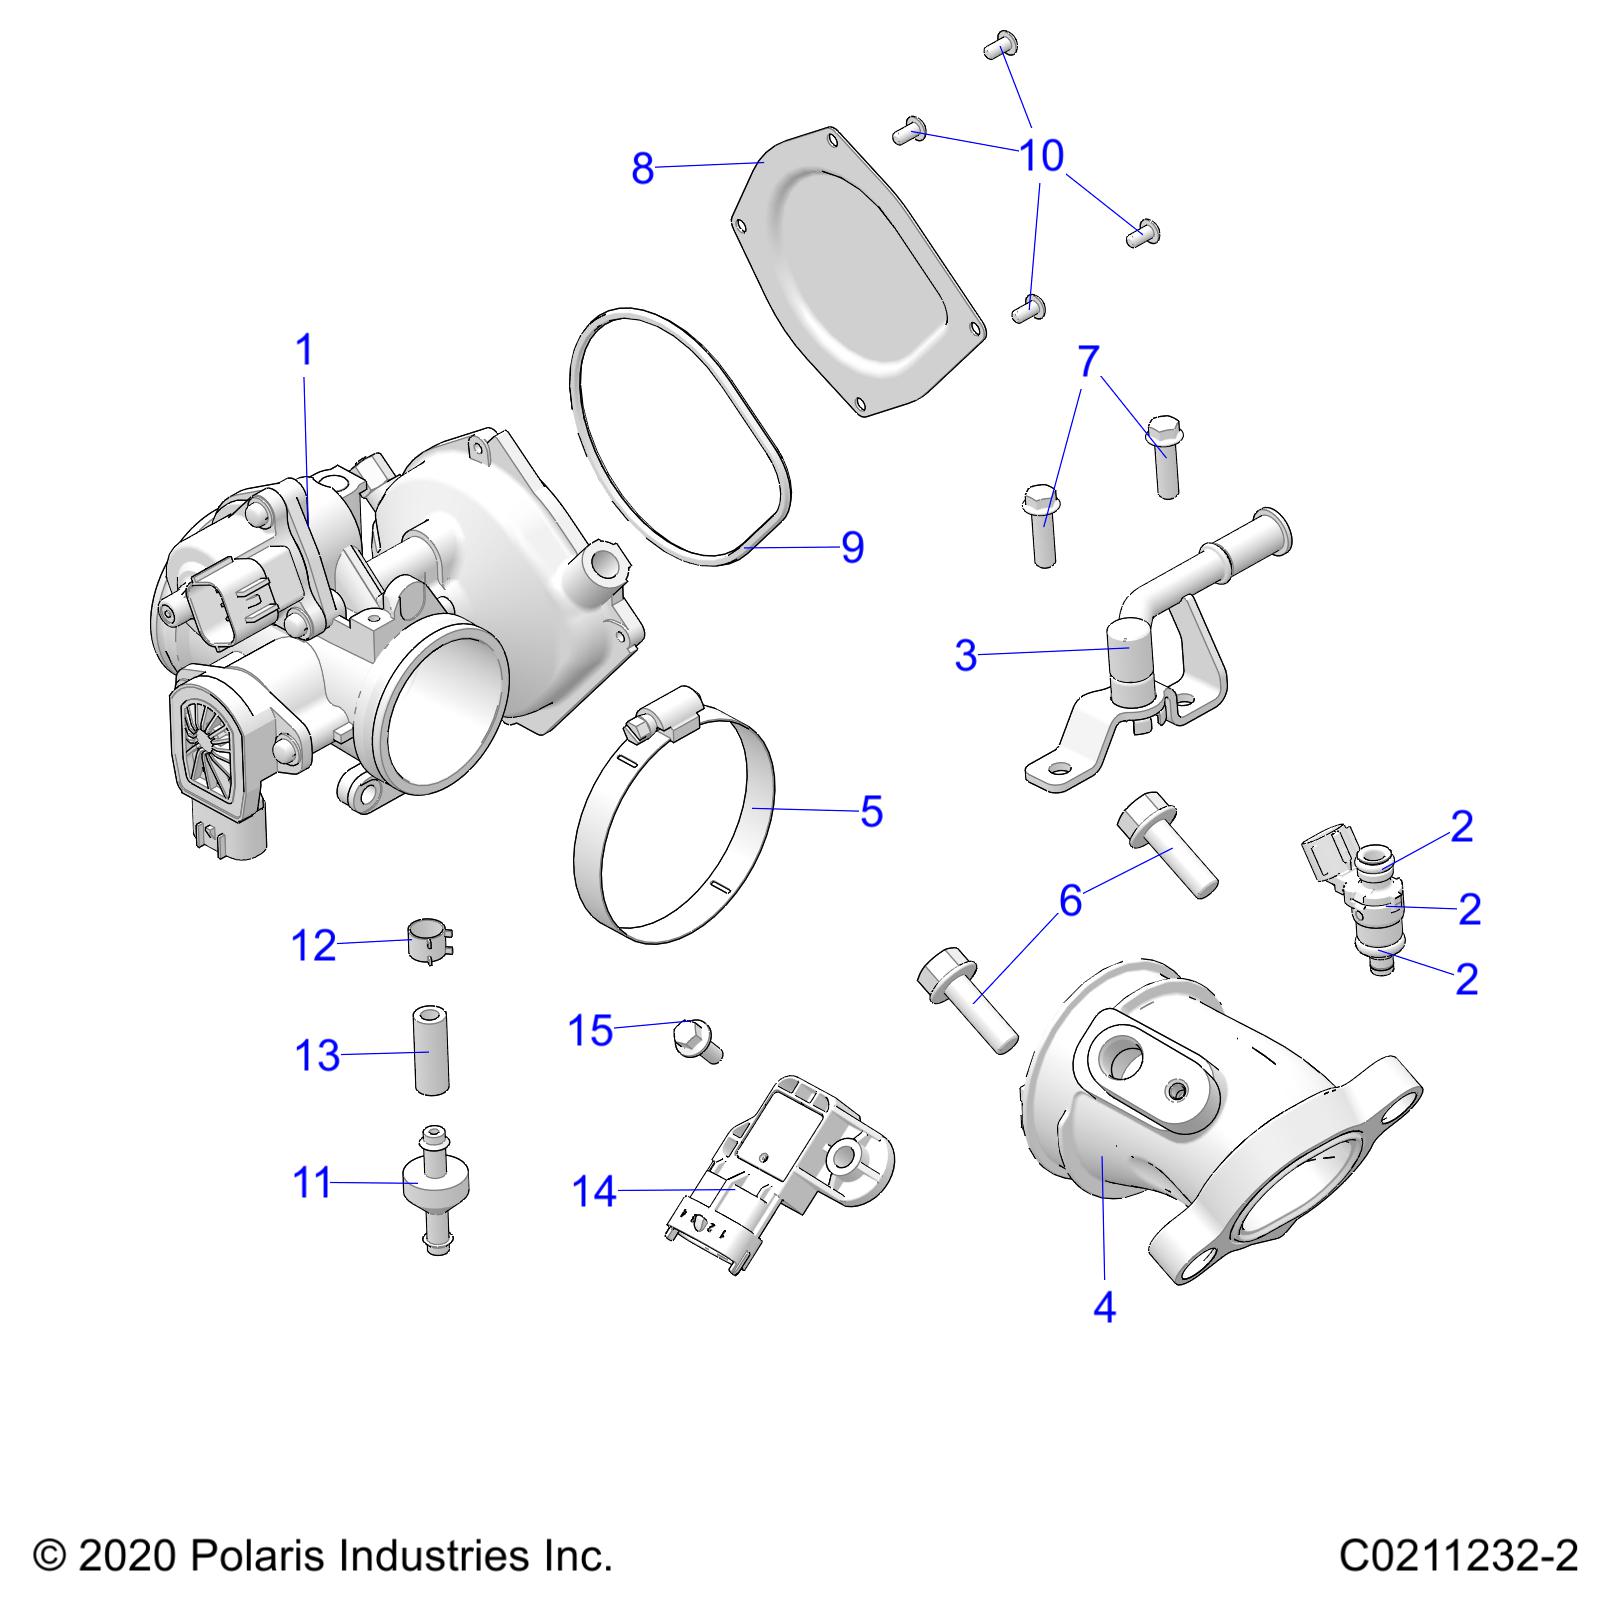 Part Number : 5415524 THROTTLE BODY ADAPTER